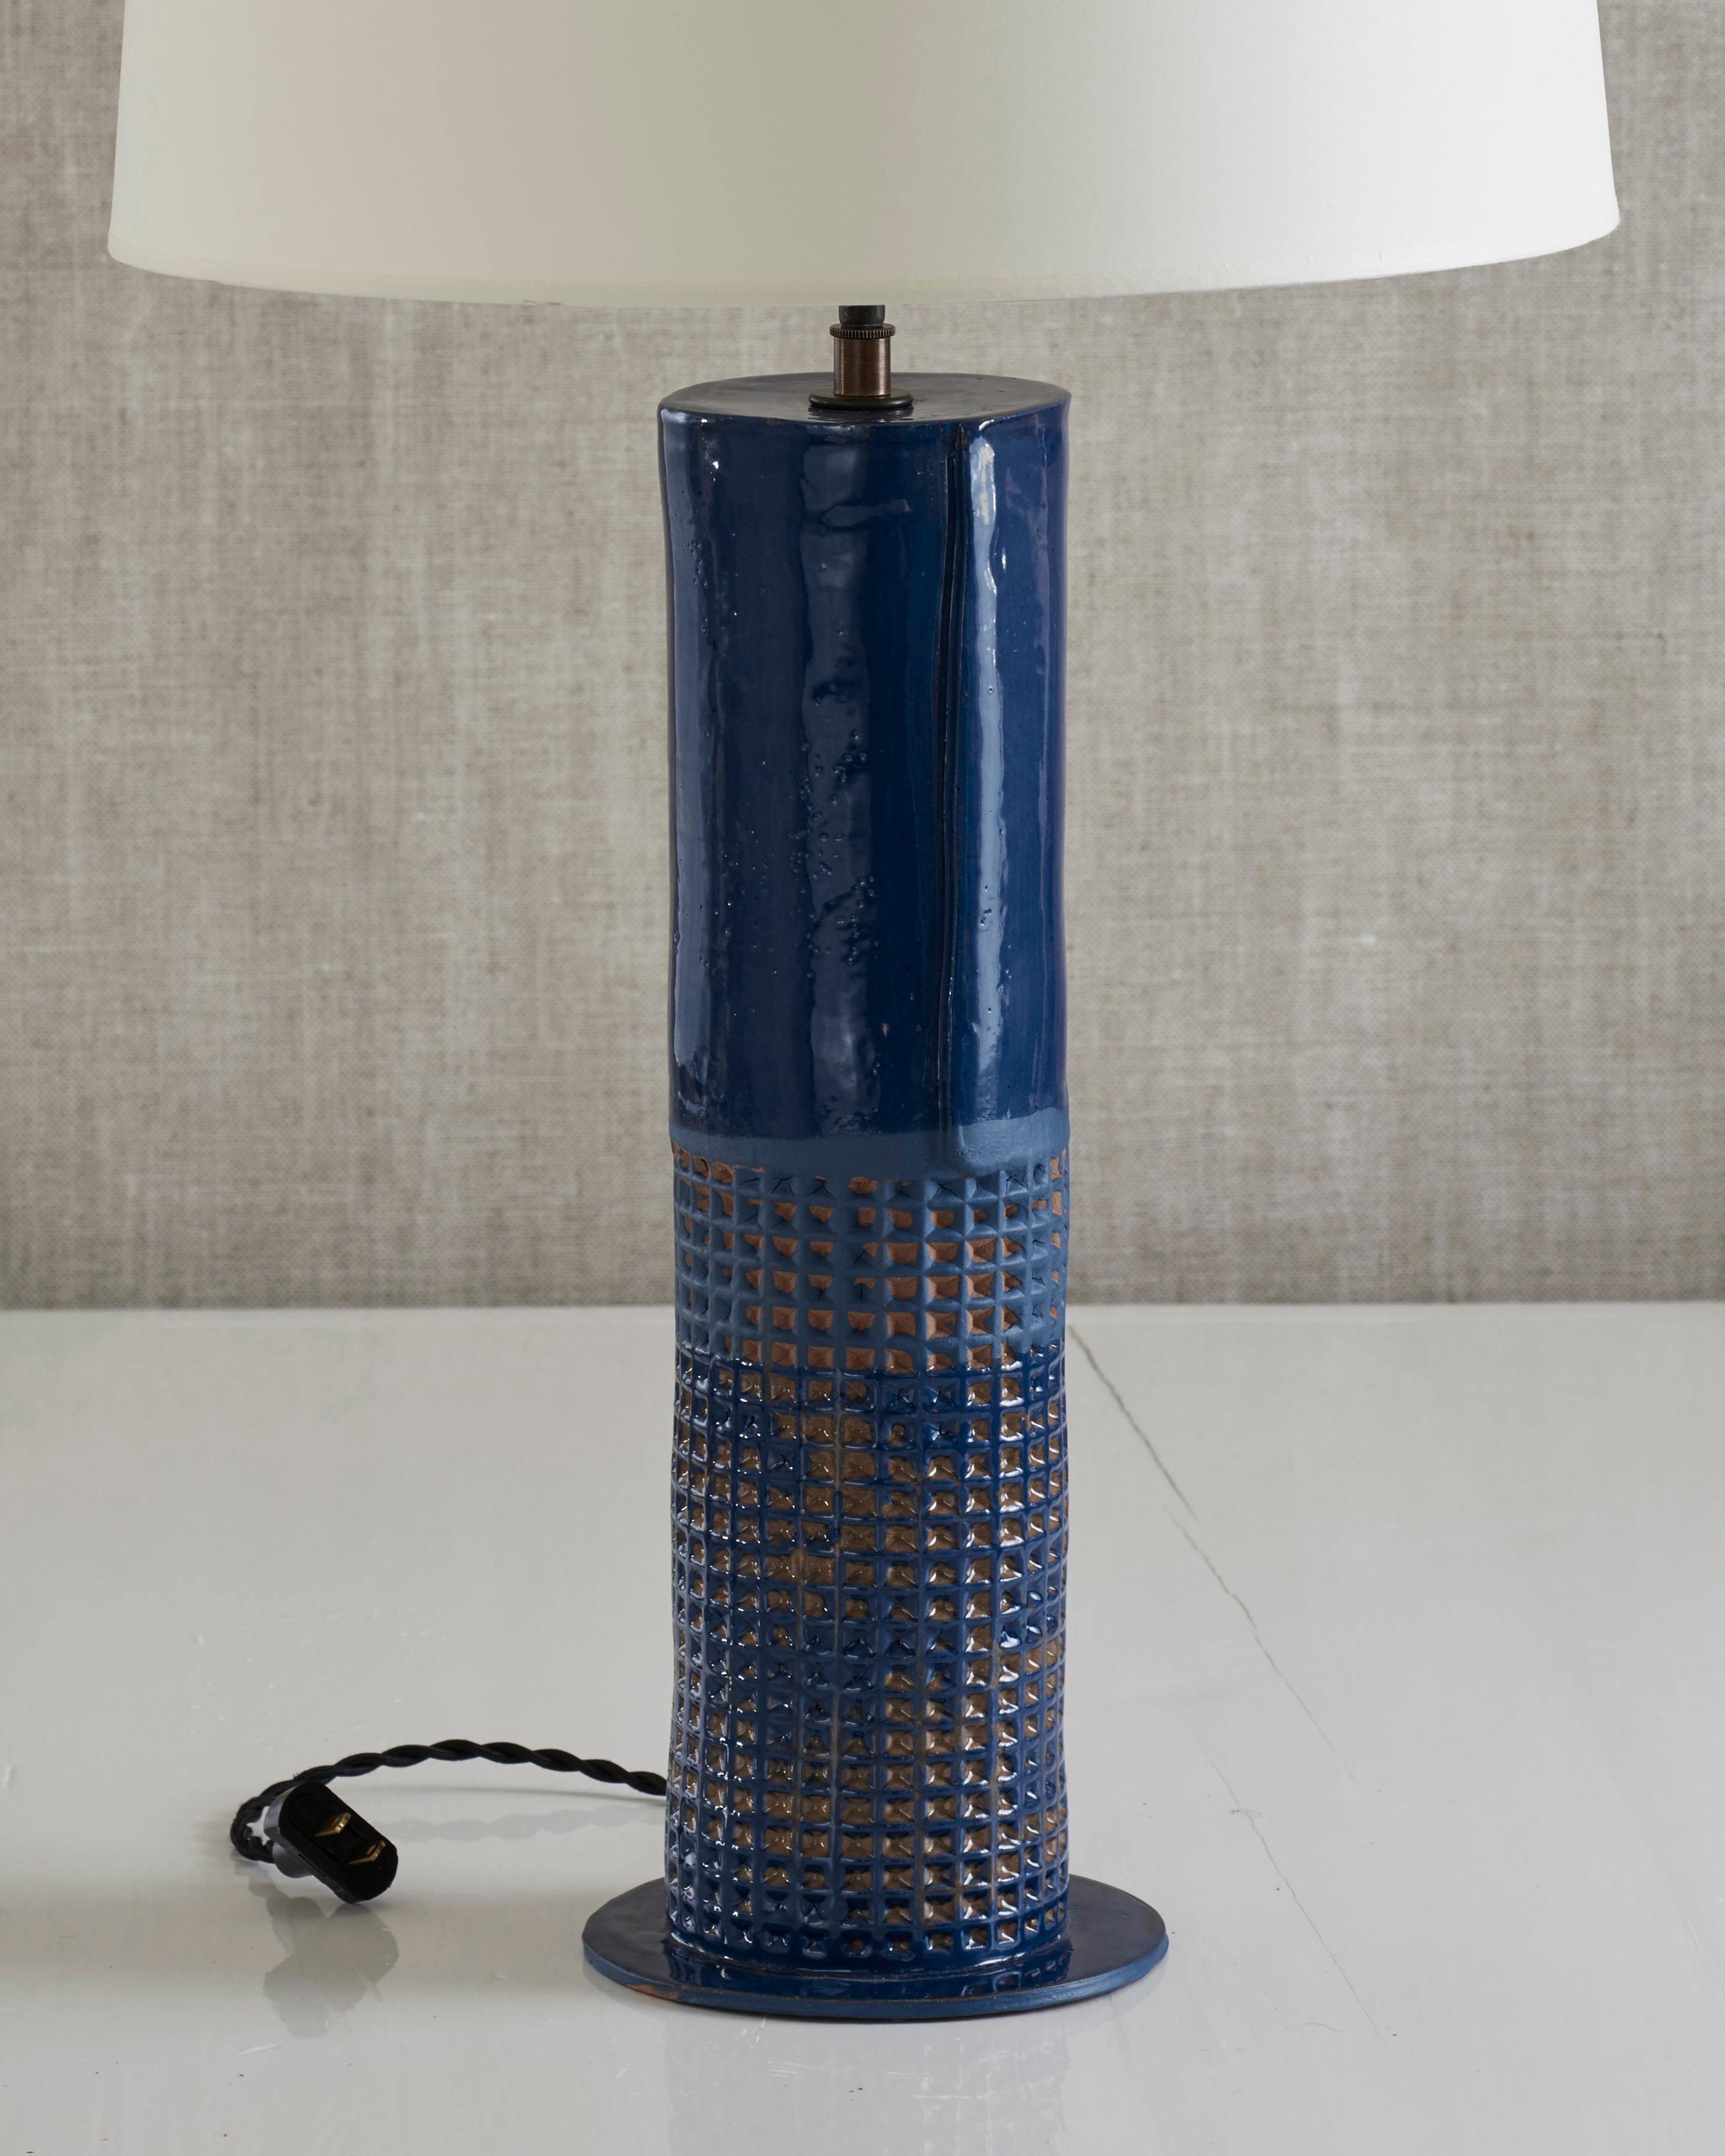 Handmade stoneware slab construction with waffle texture. Lamps are individually crafted and one of a kind.

Ultramarine glaze with waffle texture. Antique brass fittings with braided black silk cord and off-white paper shade.

Column height